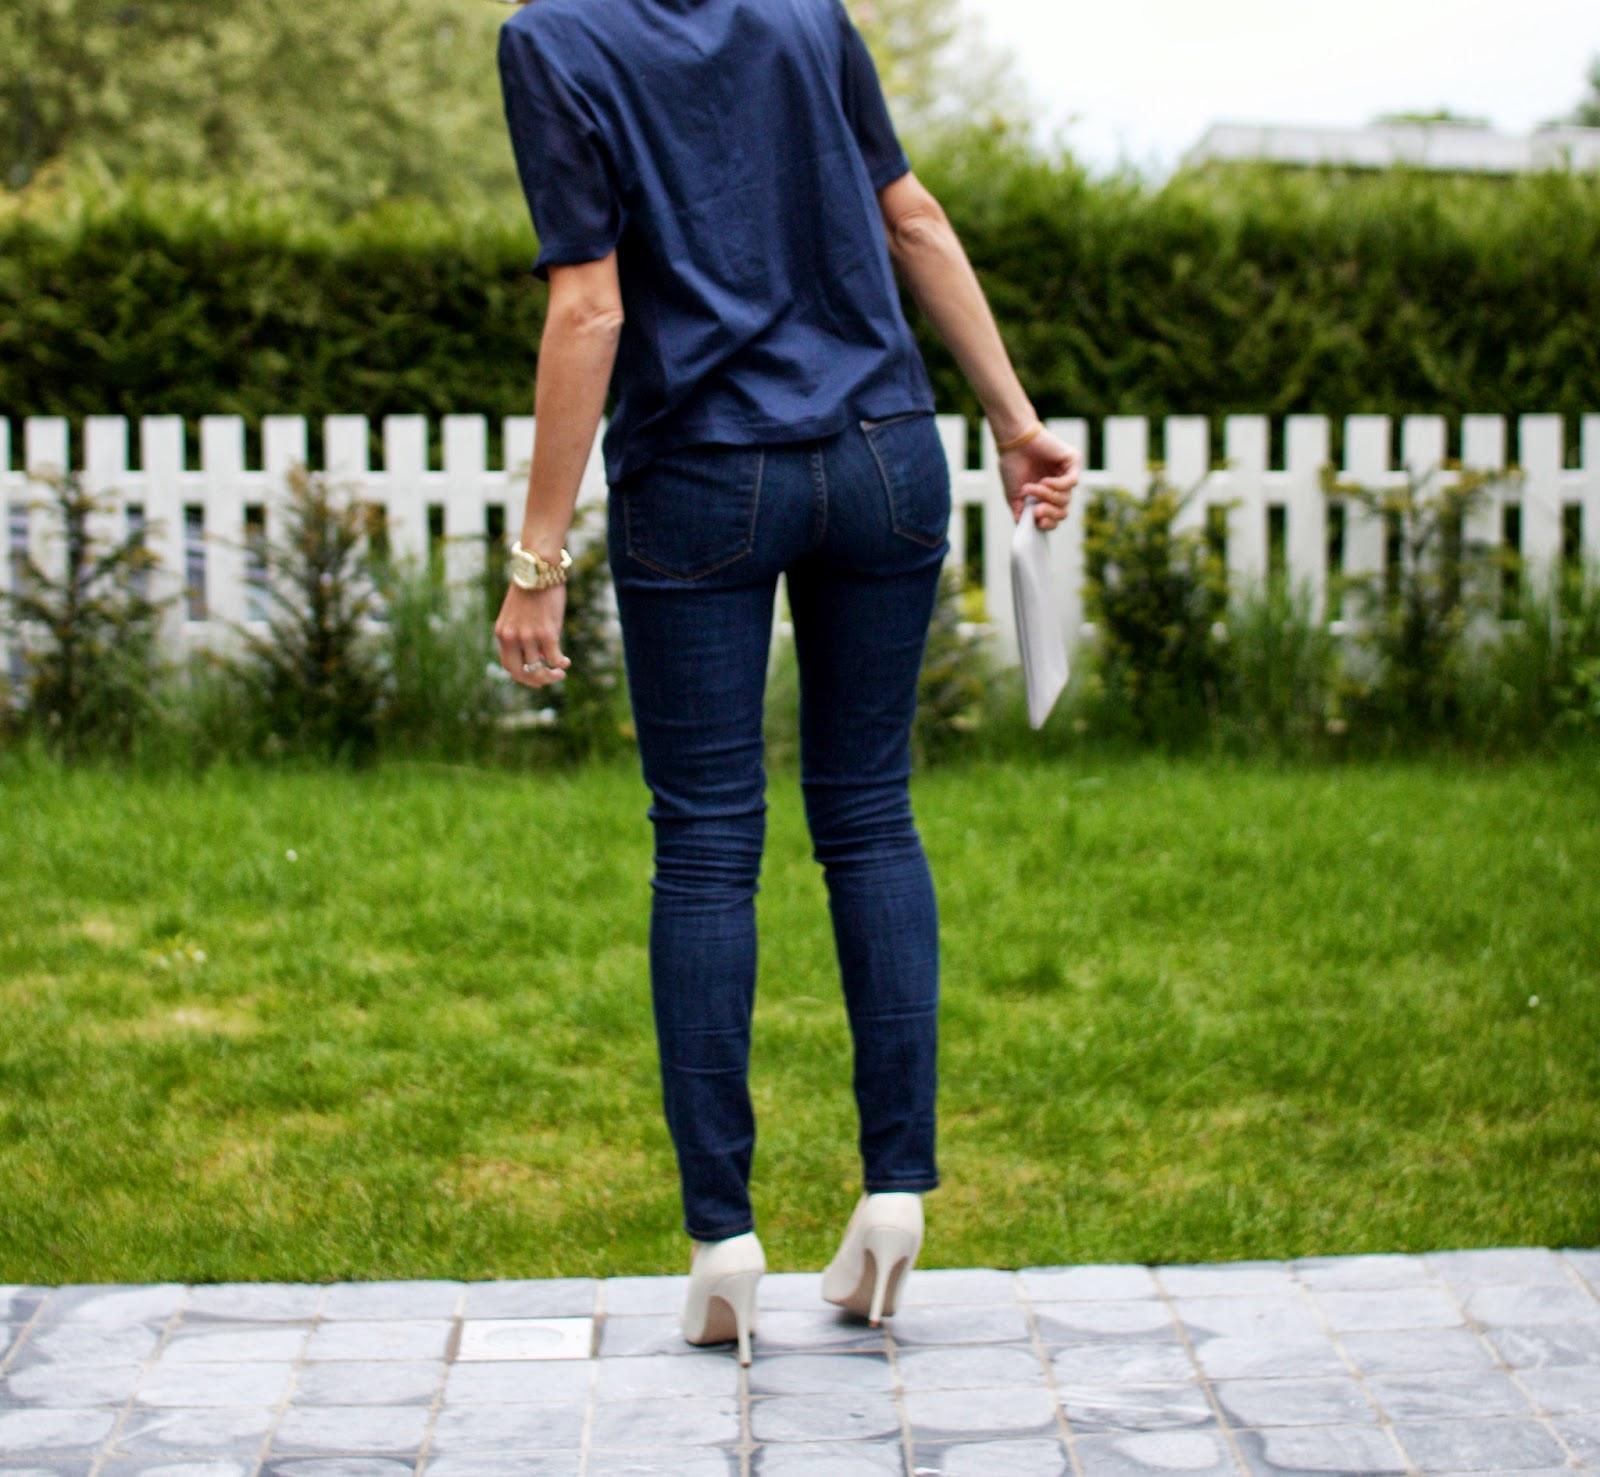 The navy top from & Other Stories